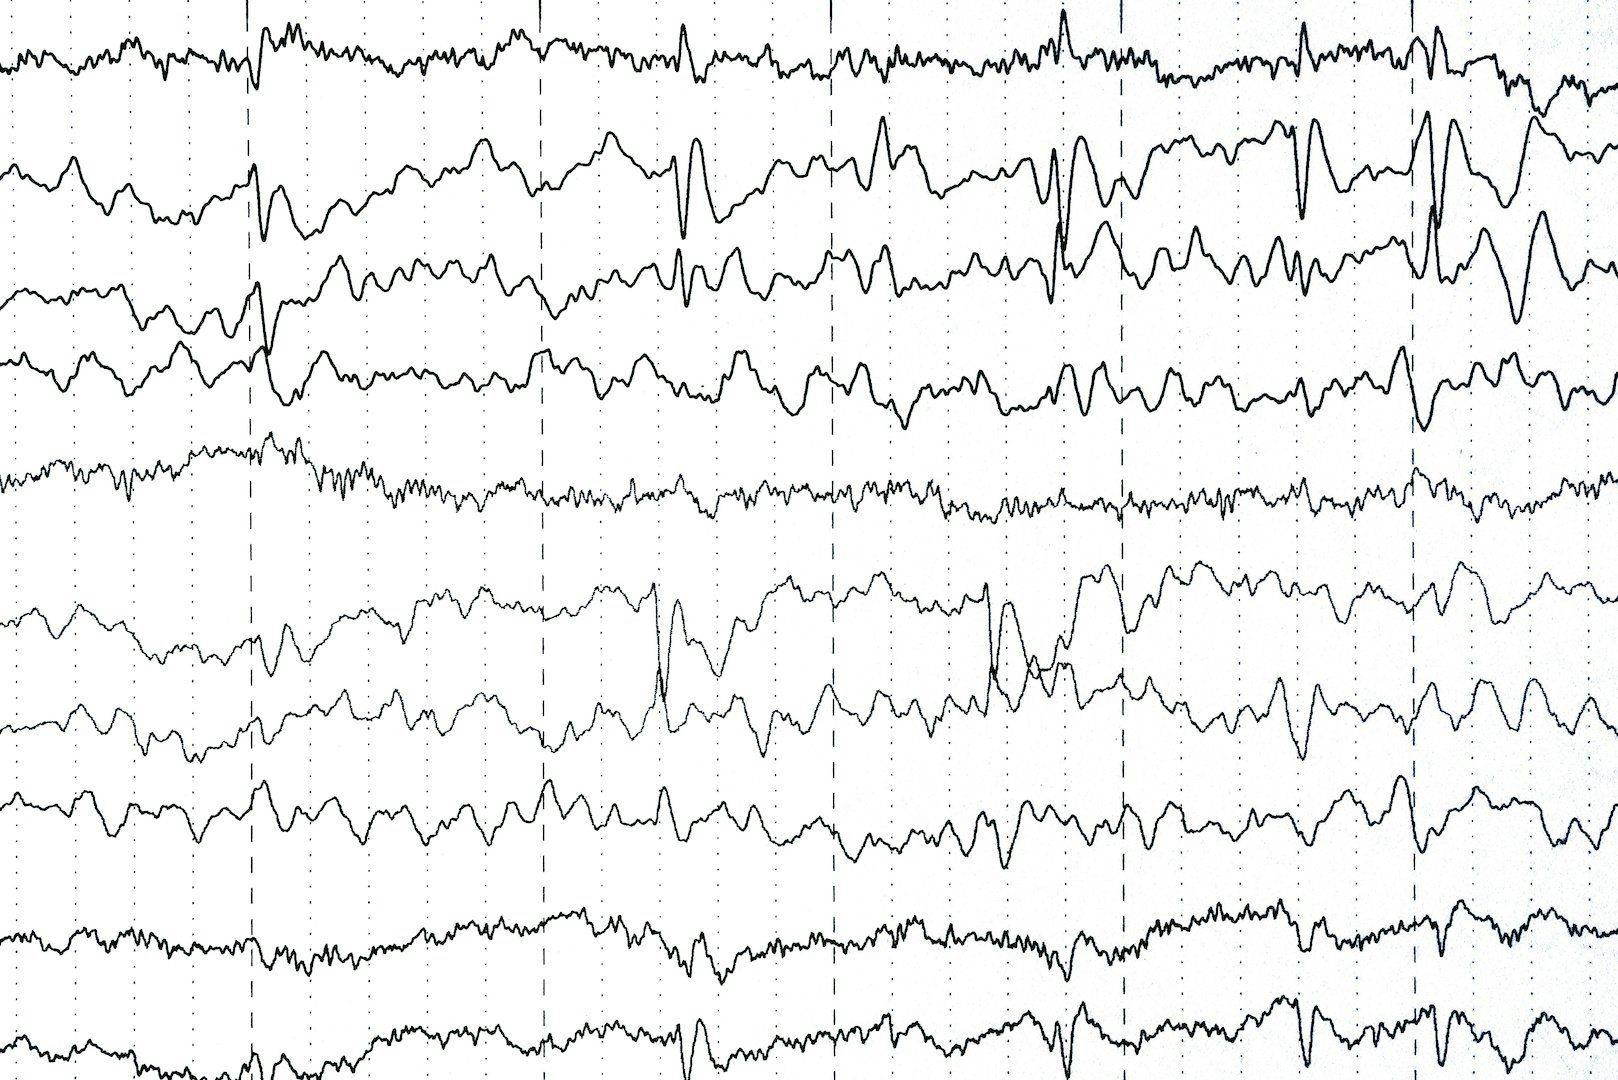 How a web-based model helps predict epilepsy risk